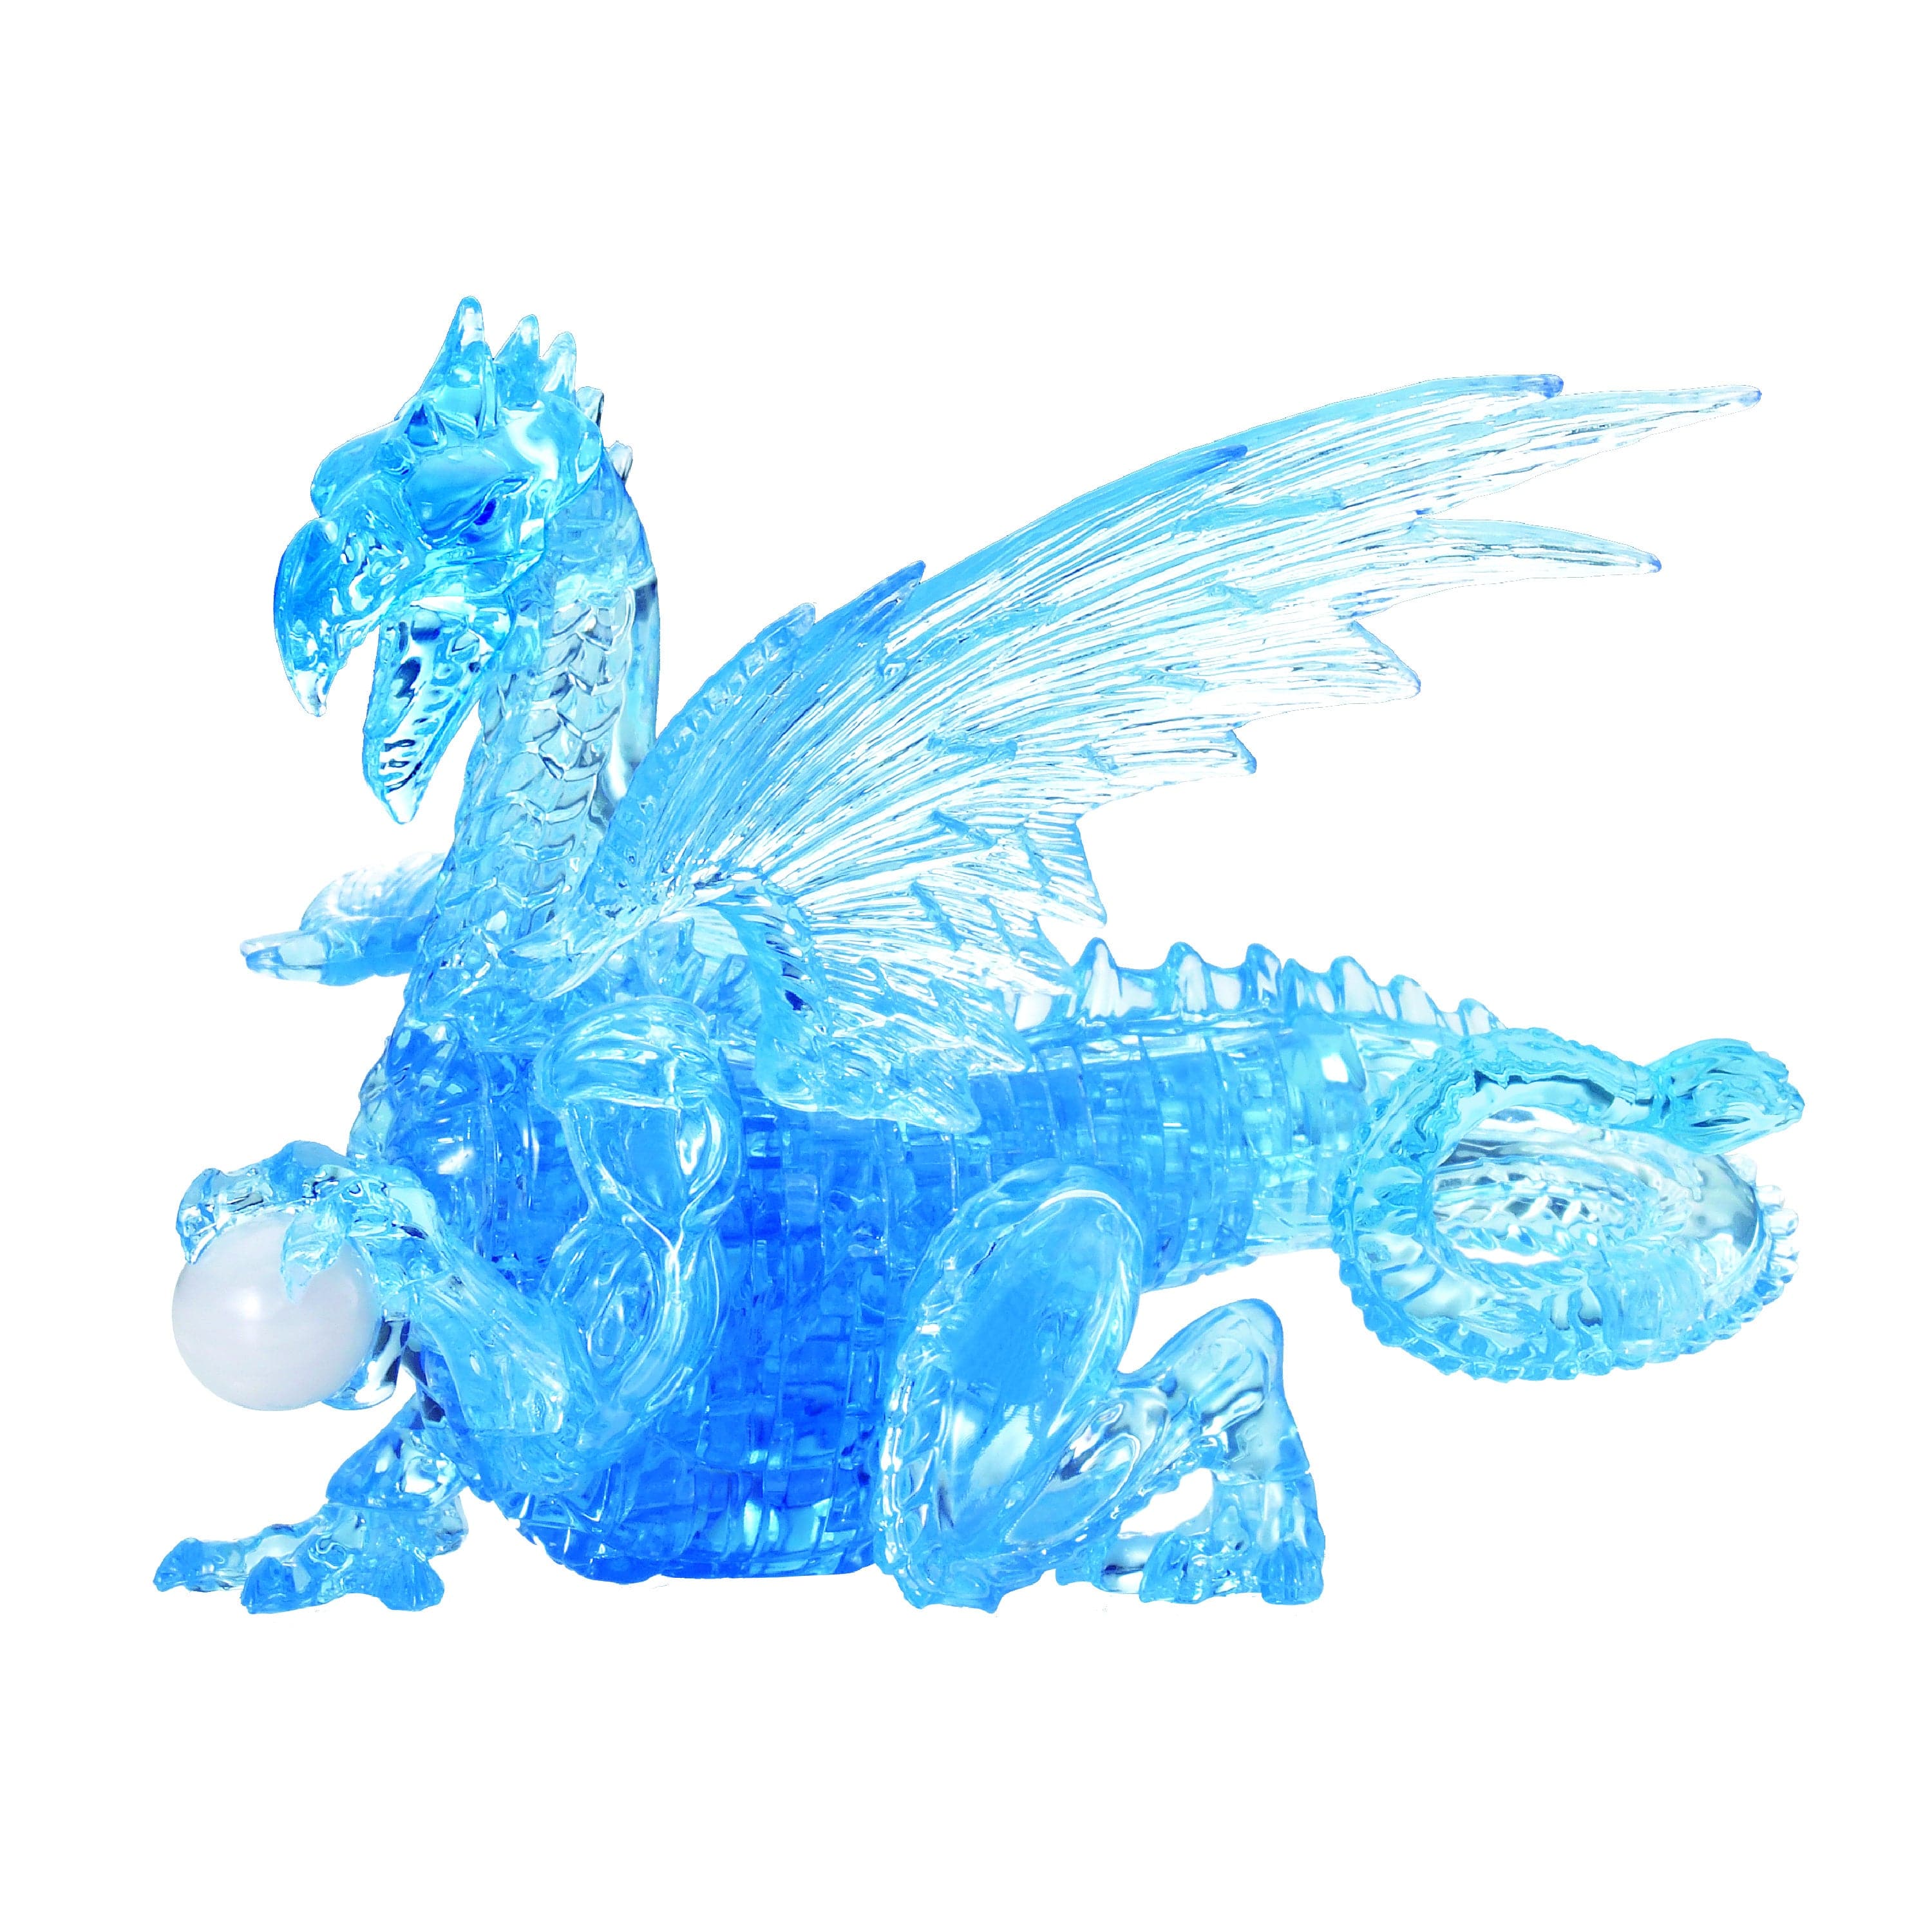 University Games-3D Crystal Puzzle Deluxe - Blue Dragon-31098-Legacy Toys